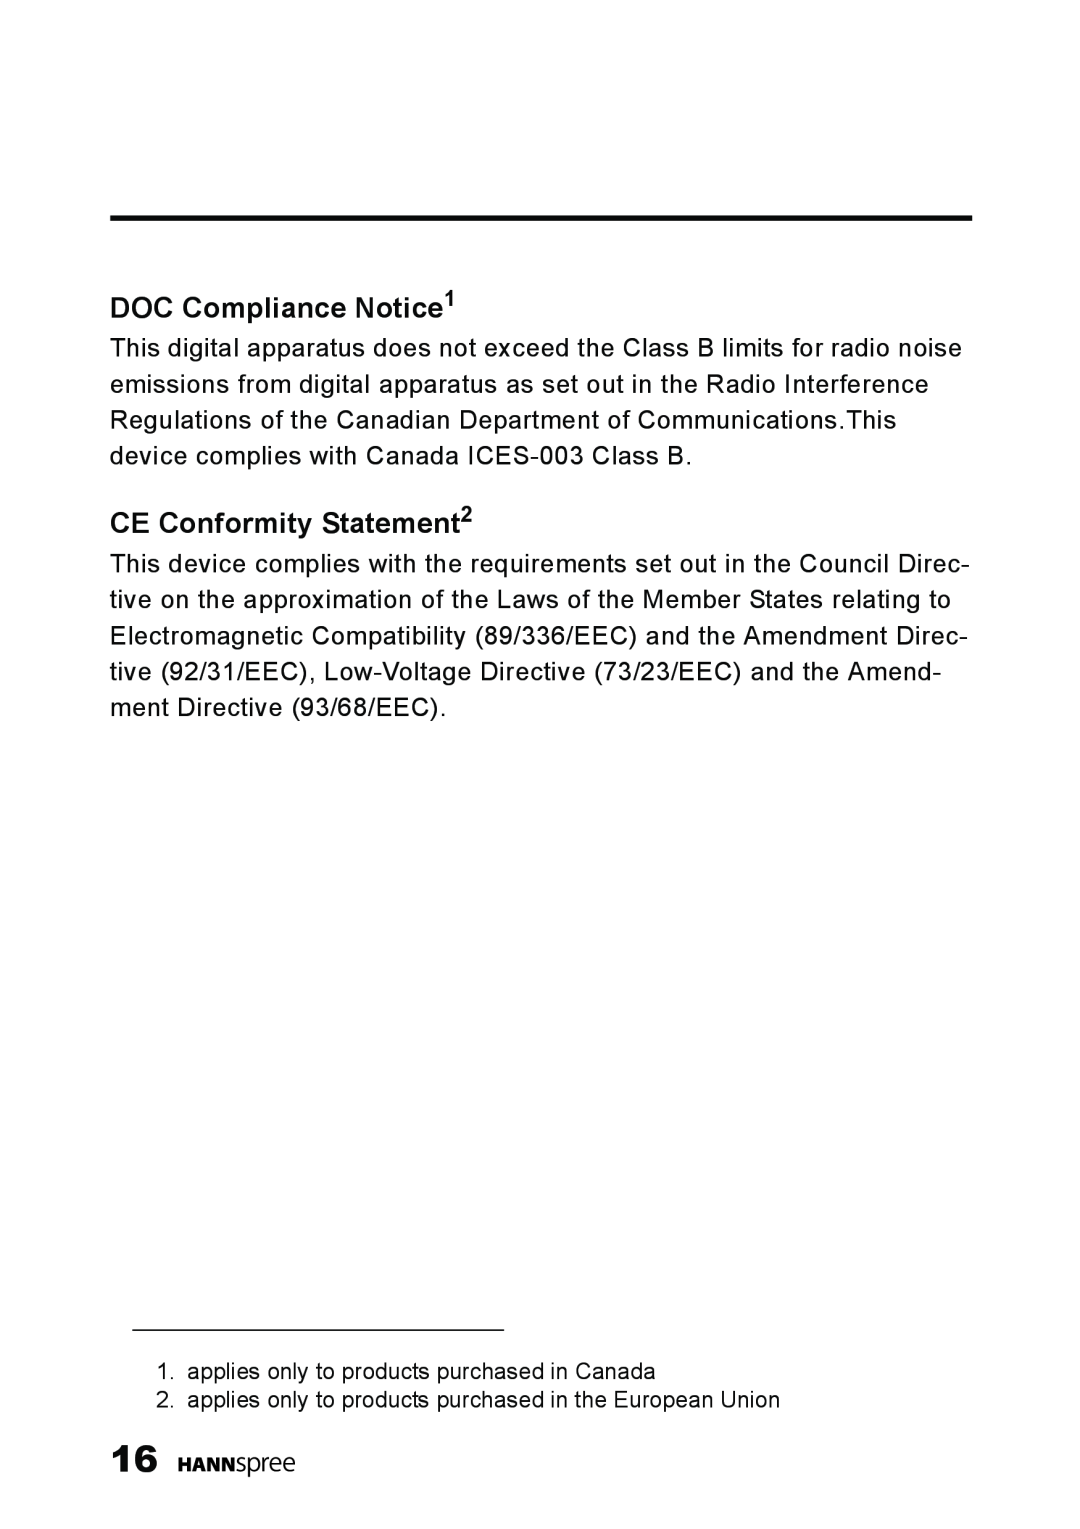 HANNspree LT11-23A1 DOC Compliance Notice1, CE Conformity Statement2, applies only to products purchased in Canada 